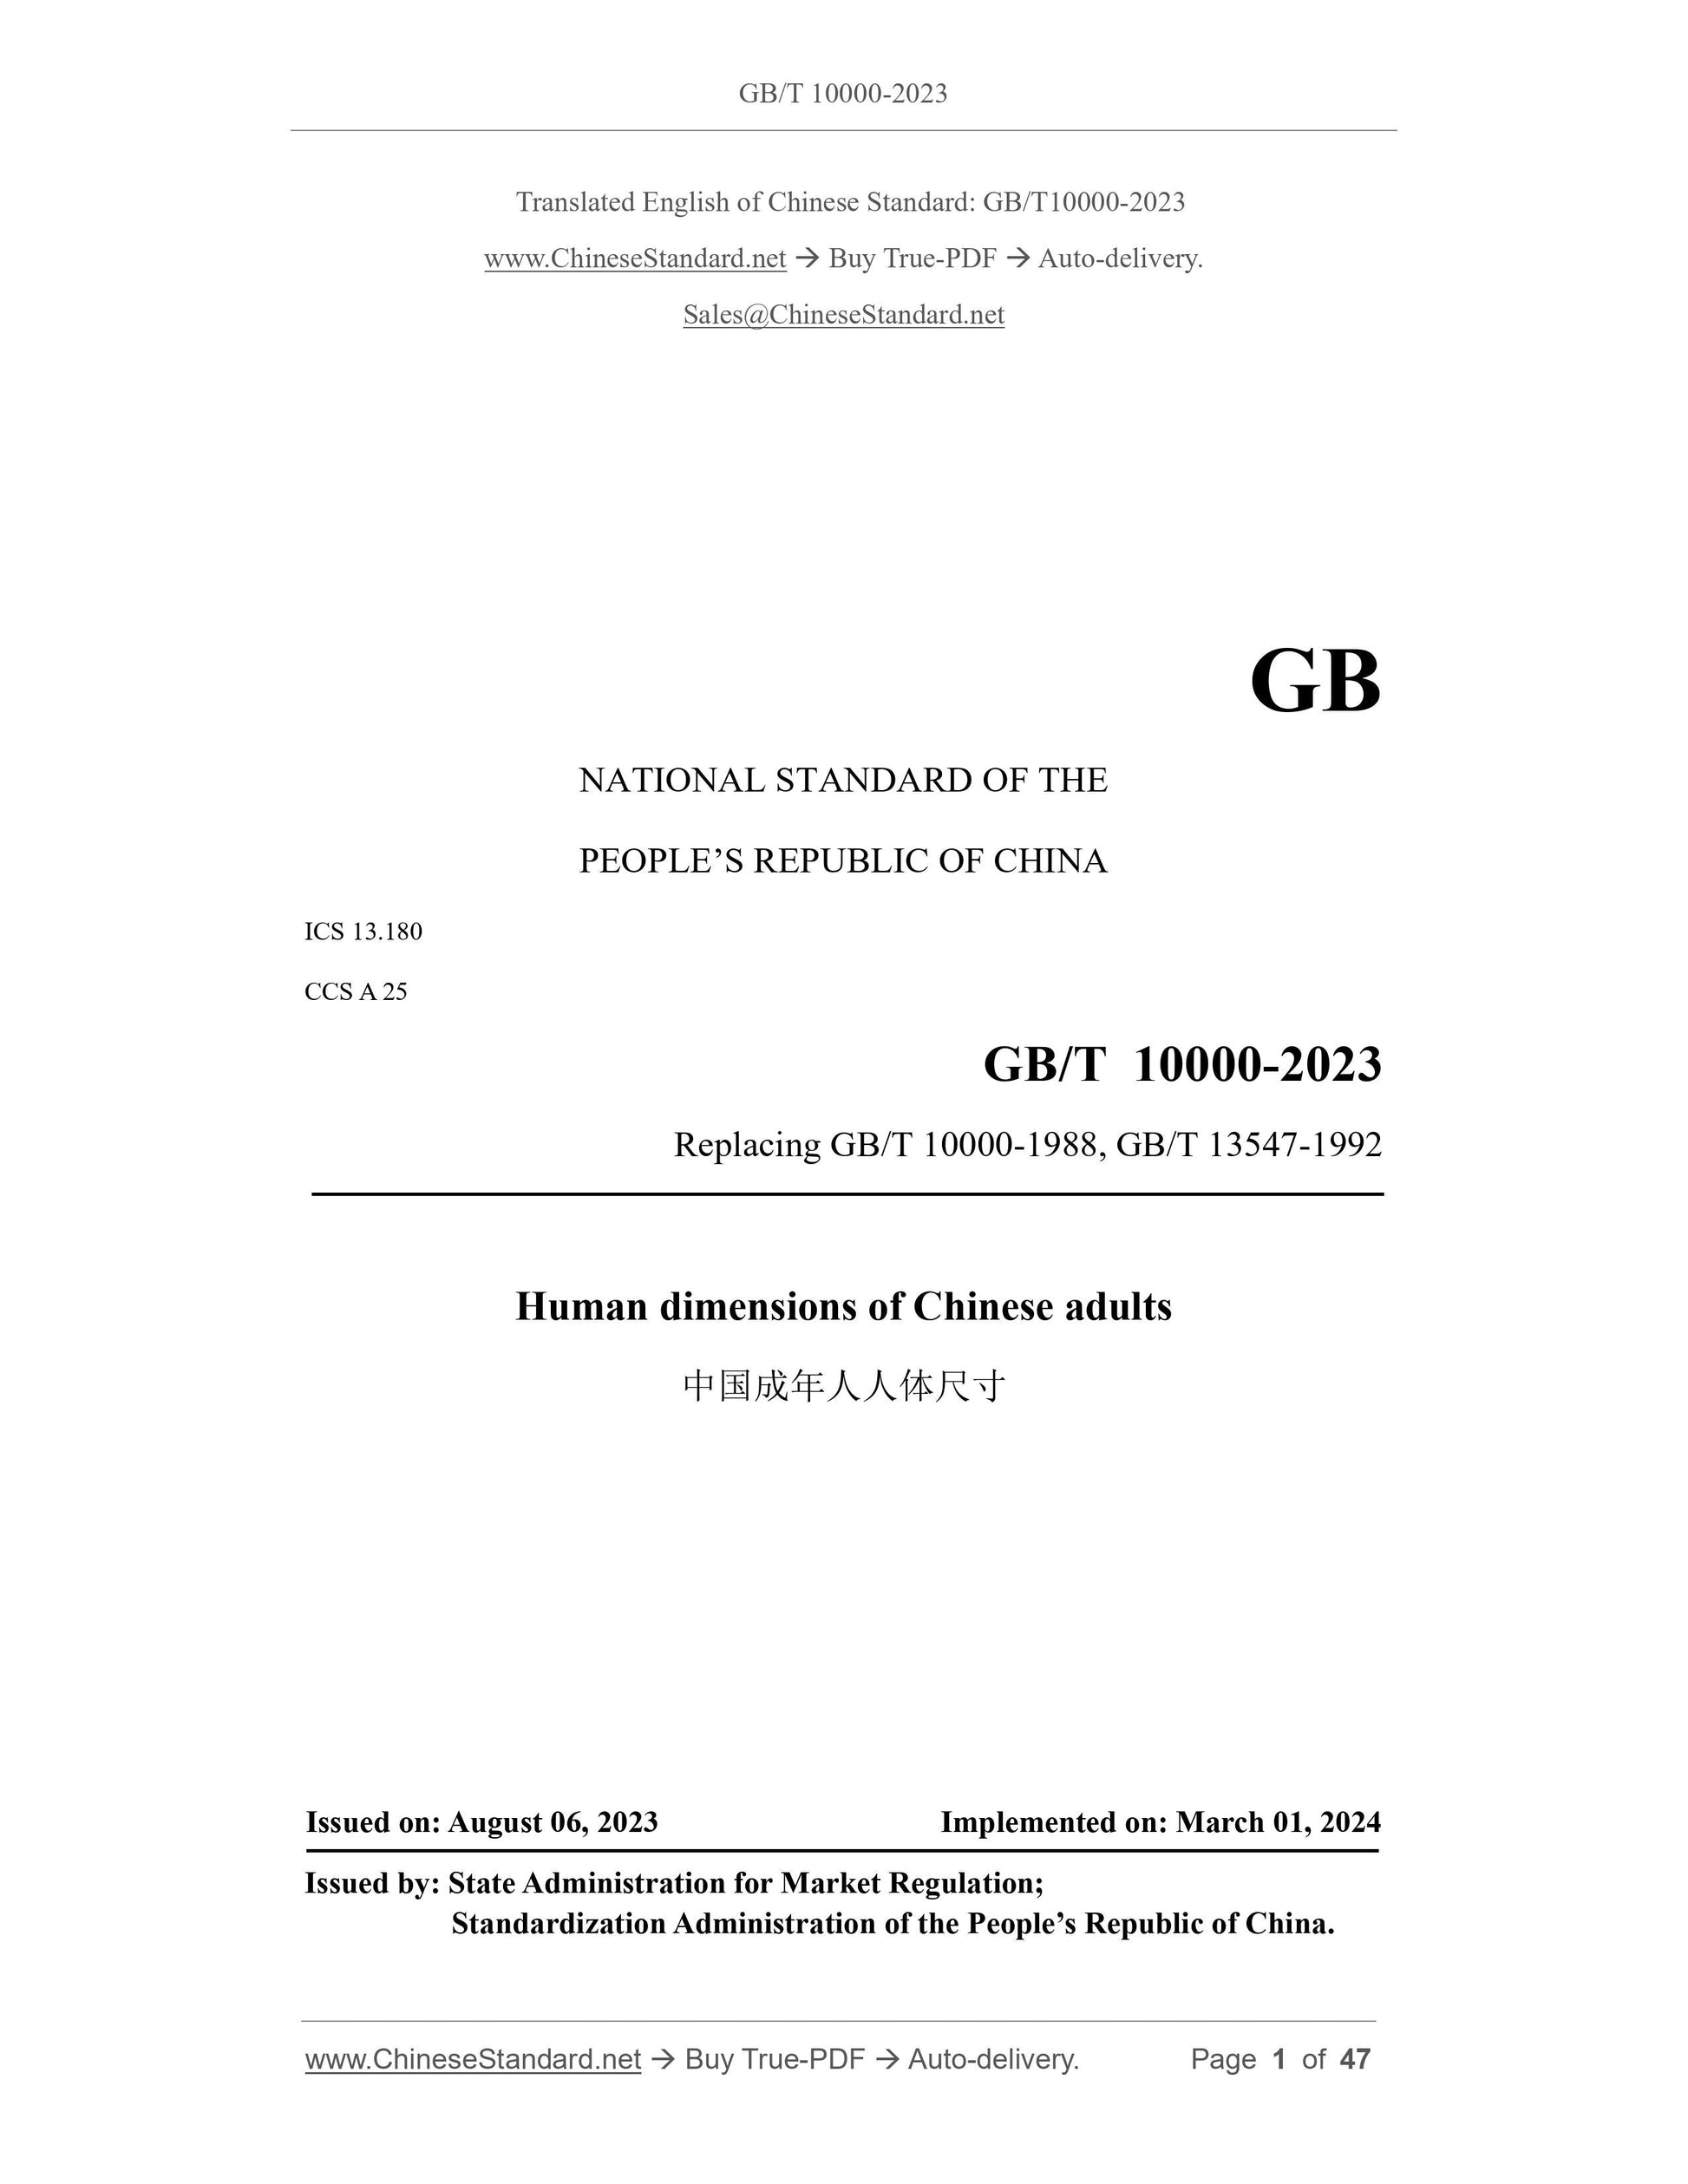 GB/T 10000-2023 Page 1